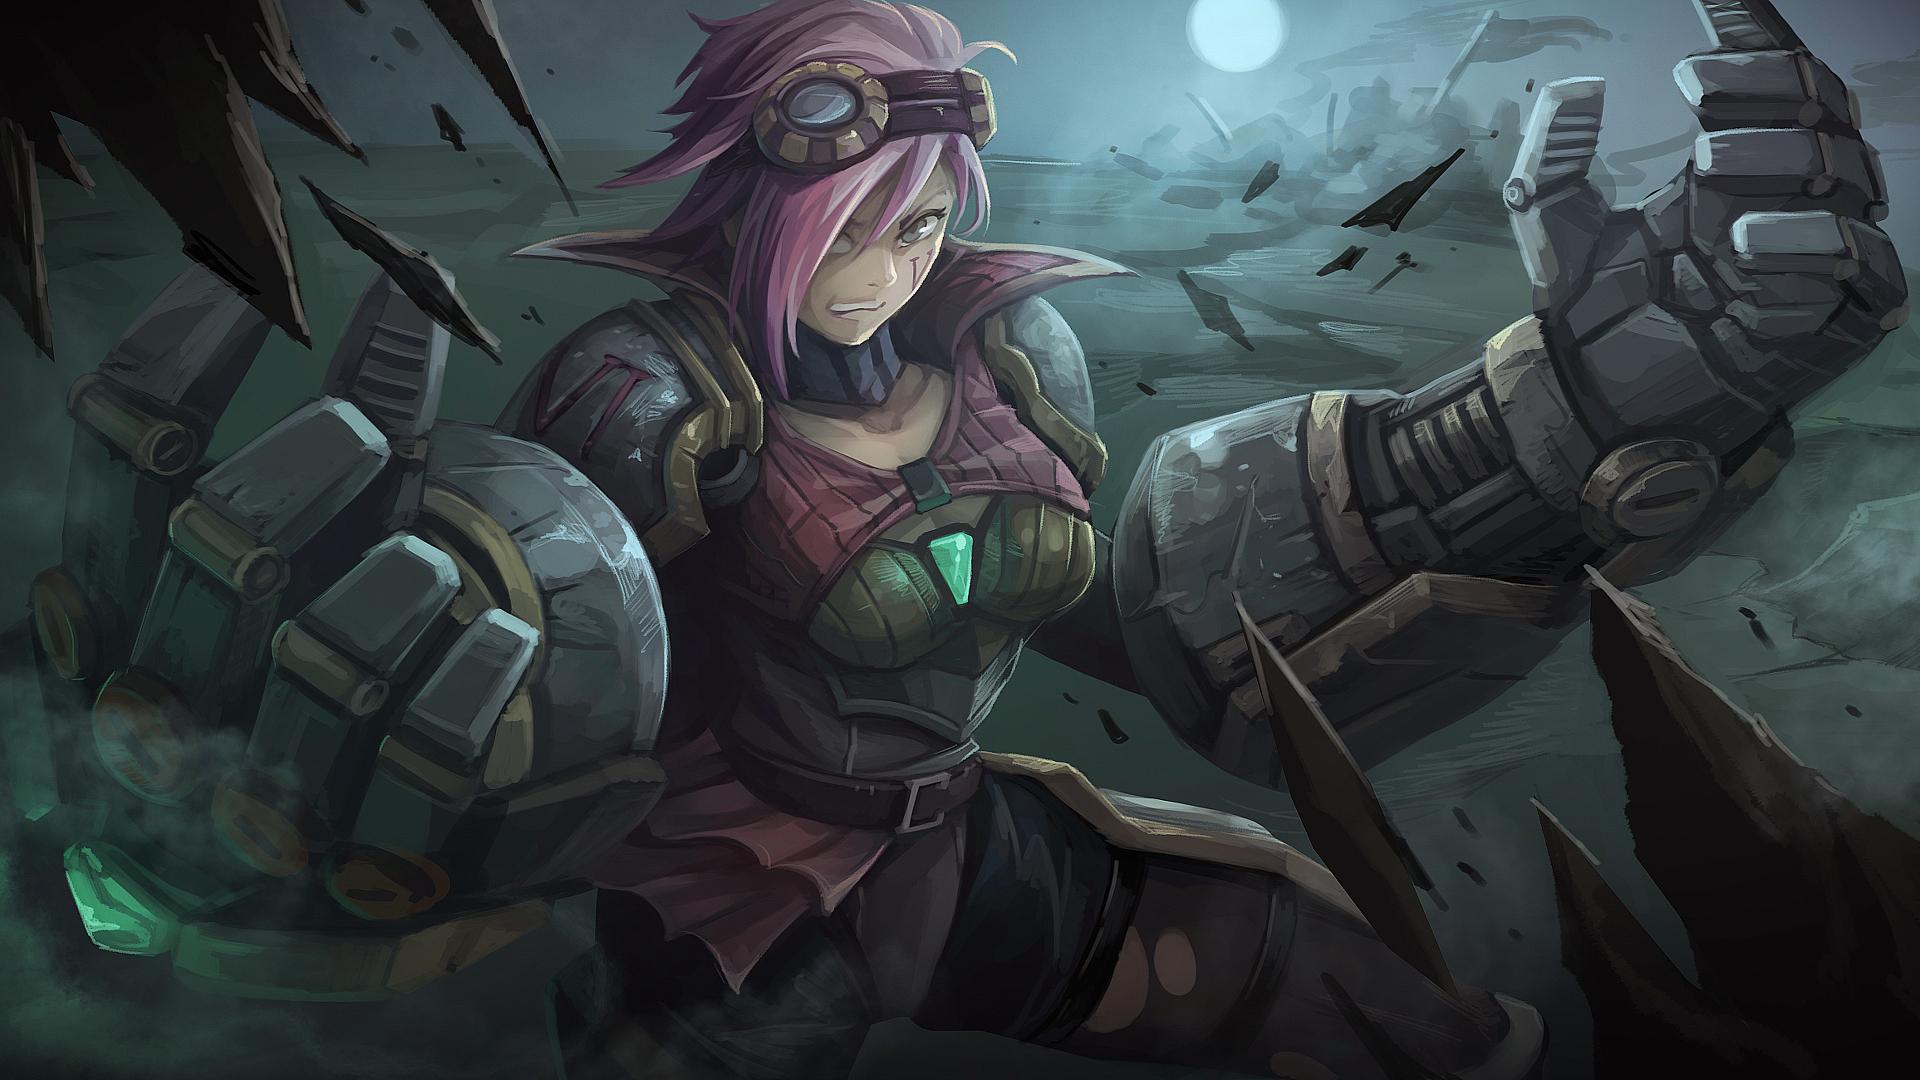 Hd Angry Vi In League Of Legends Wallpaper Of Legends Vi